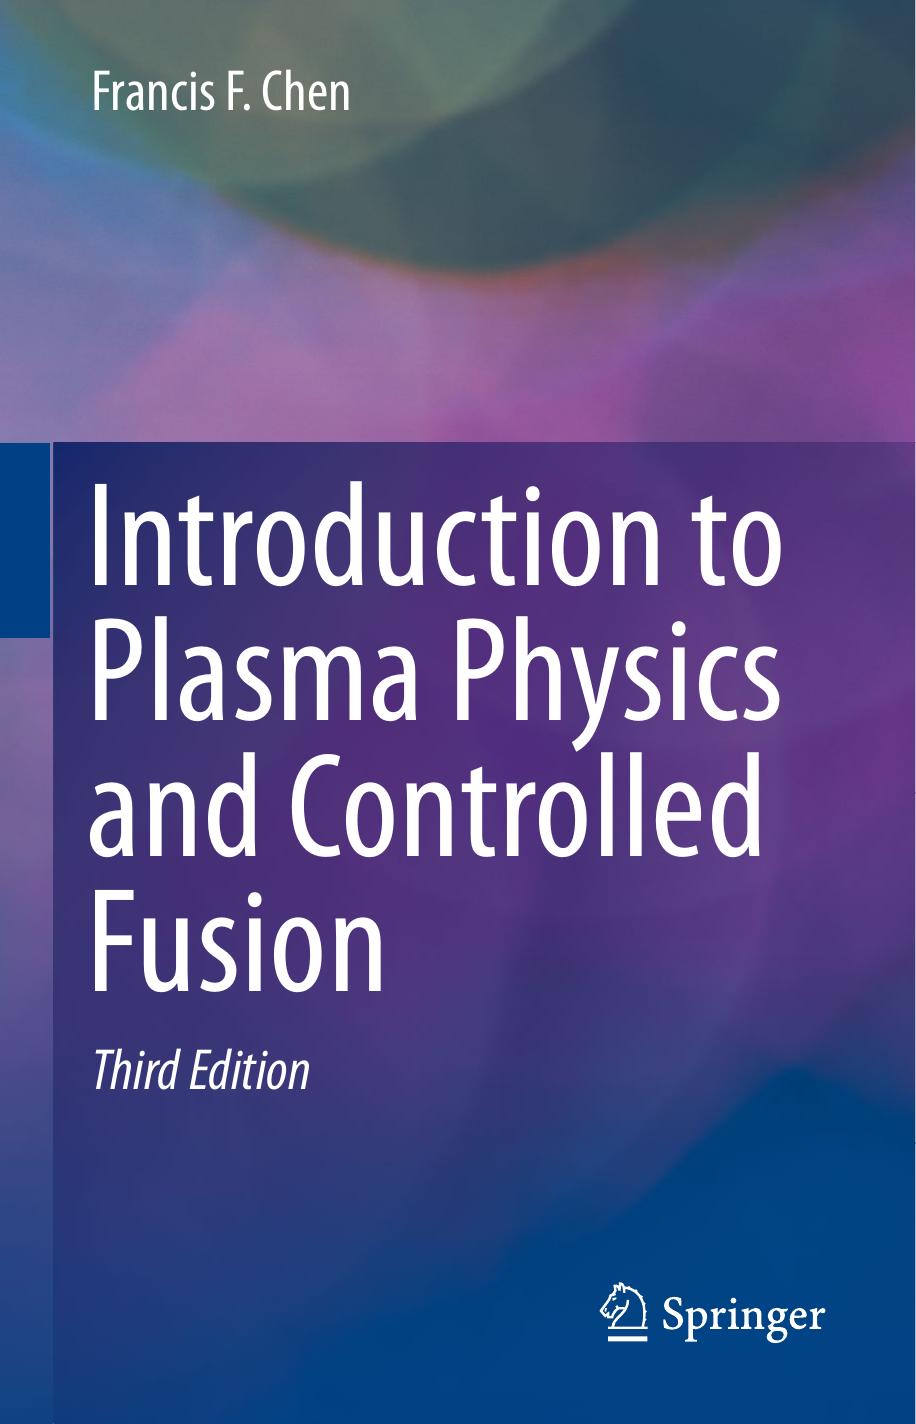 Introduction to Plasma Physics and Controlled Fusion by Francis F. Chen